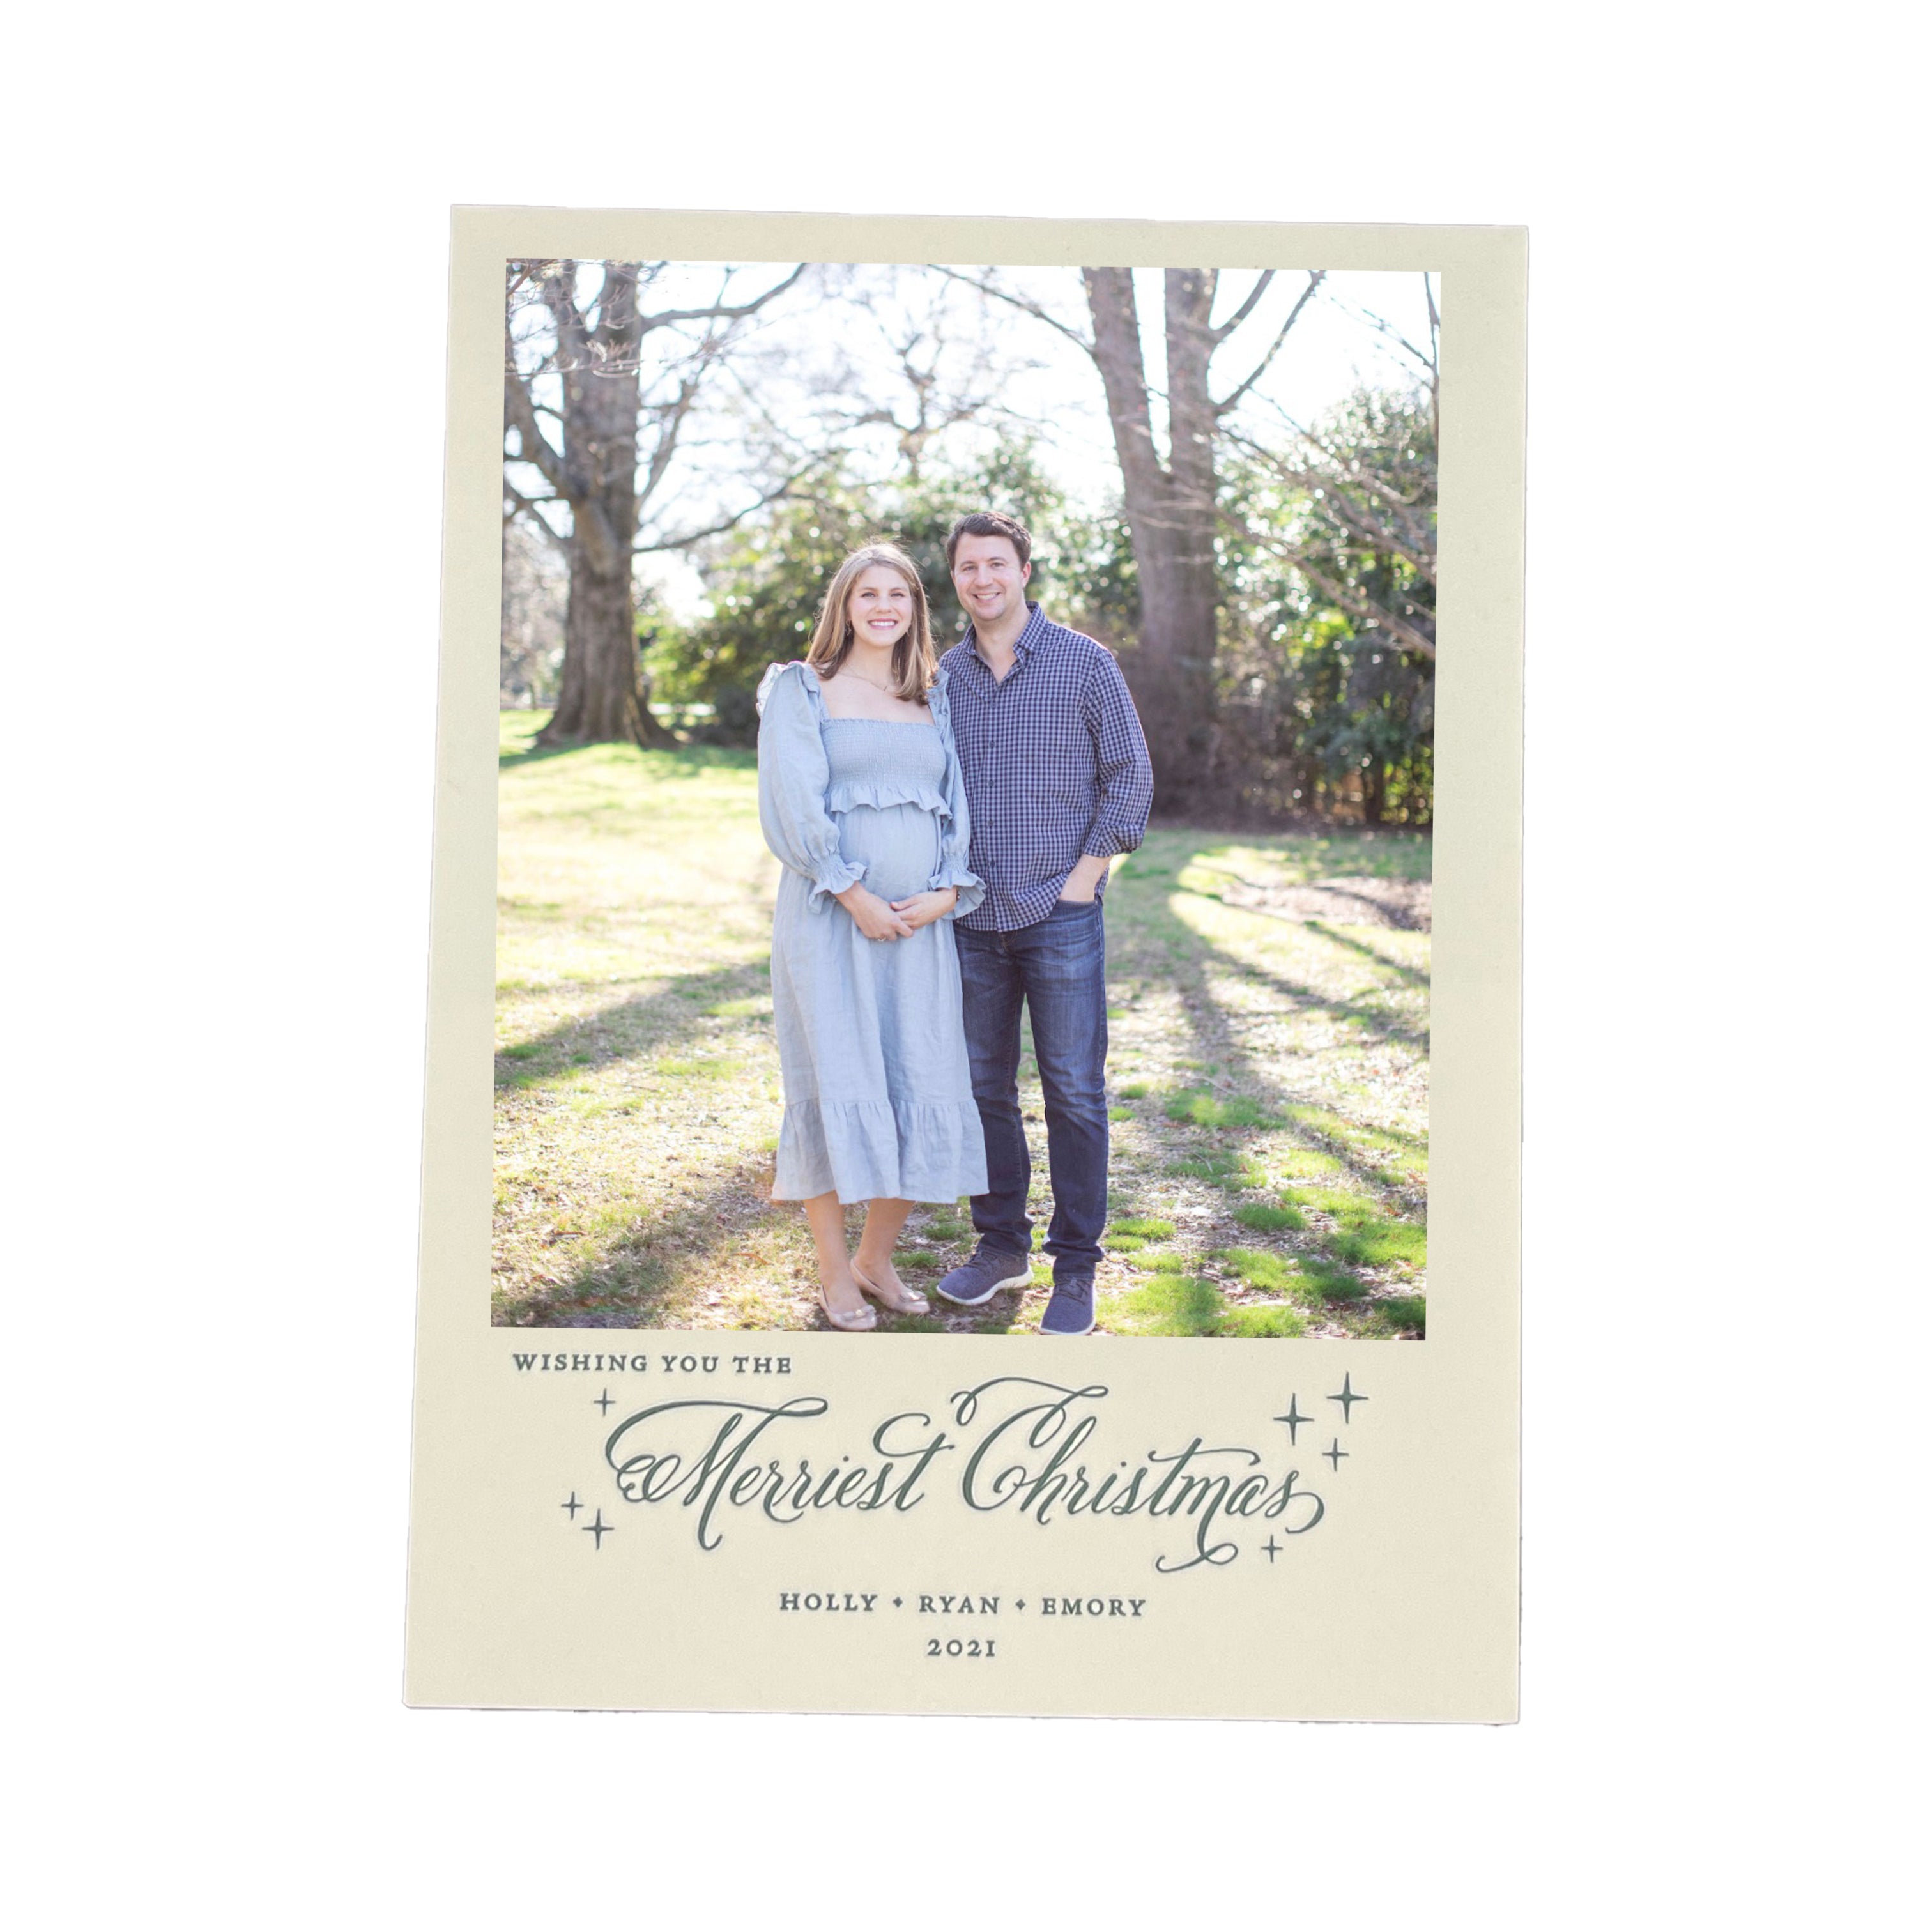 The Emory Holiday Card Stovall Collection